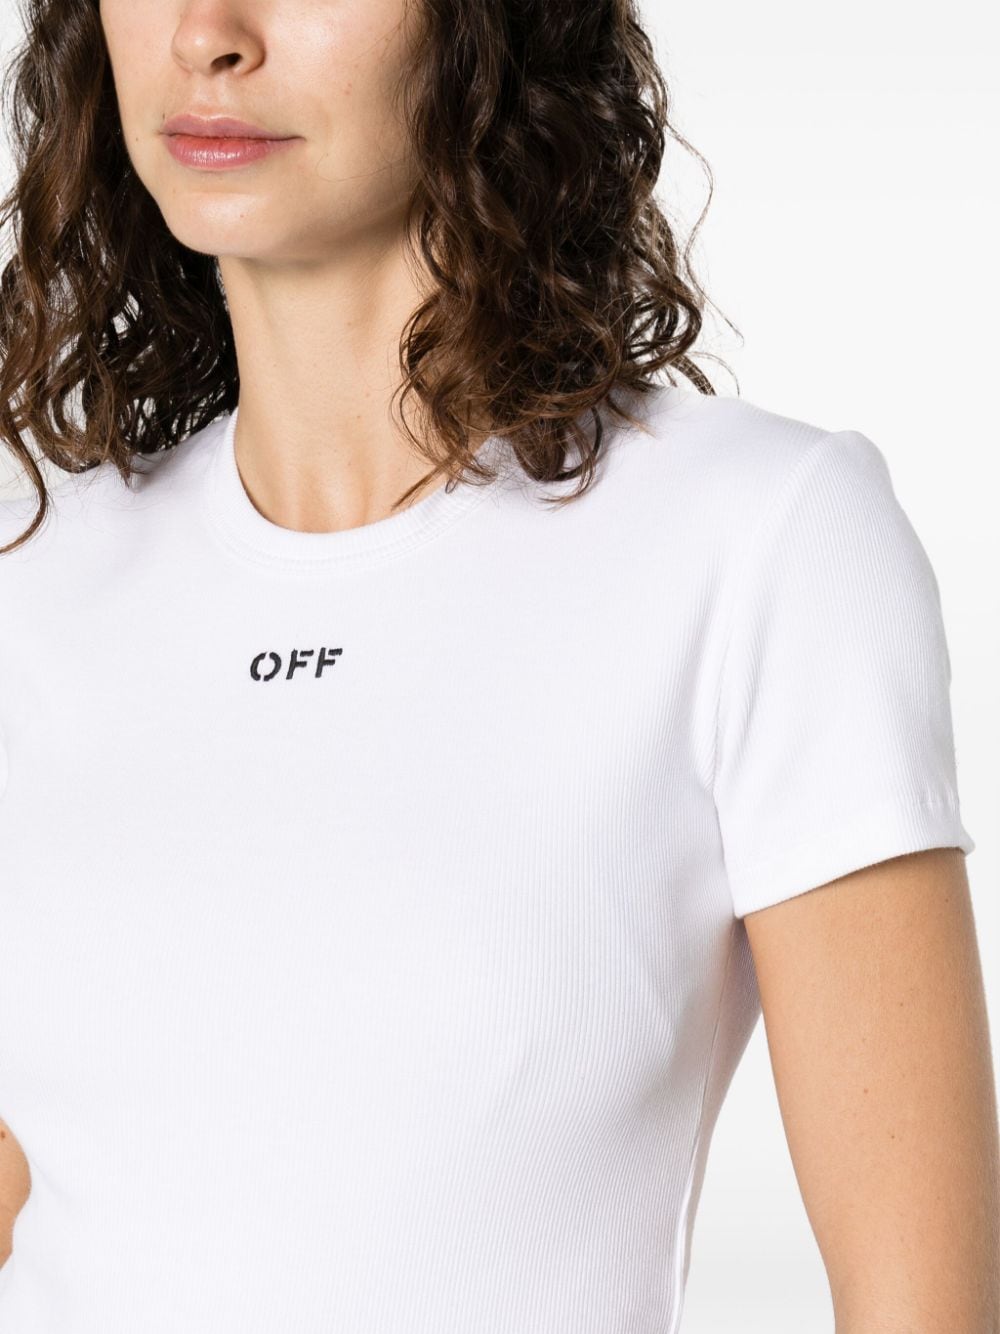 Off Stamp stretch-cotton T-shirt<BR/><BR/><BR/>